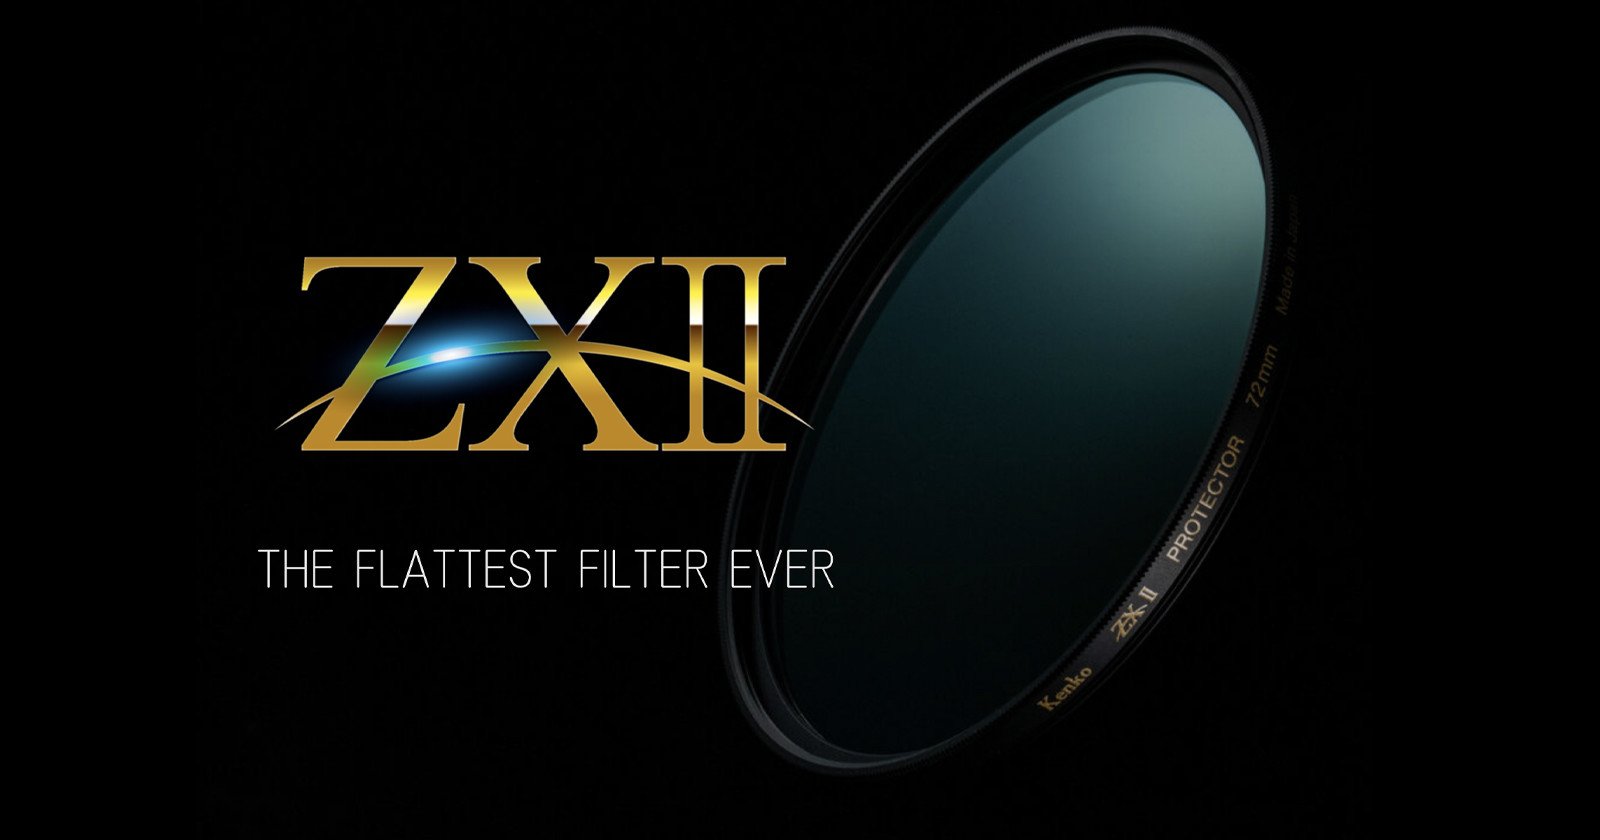  kenko says its zxii floating frame filters result 